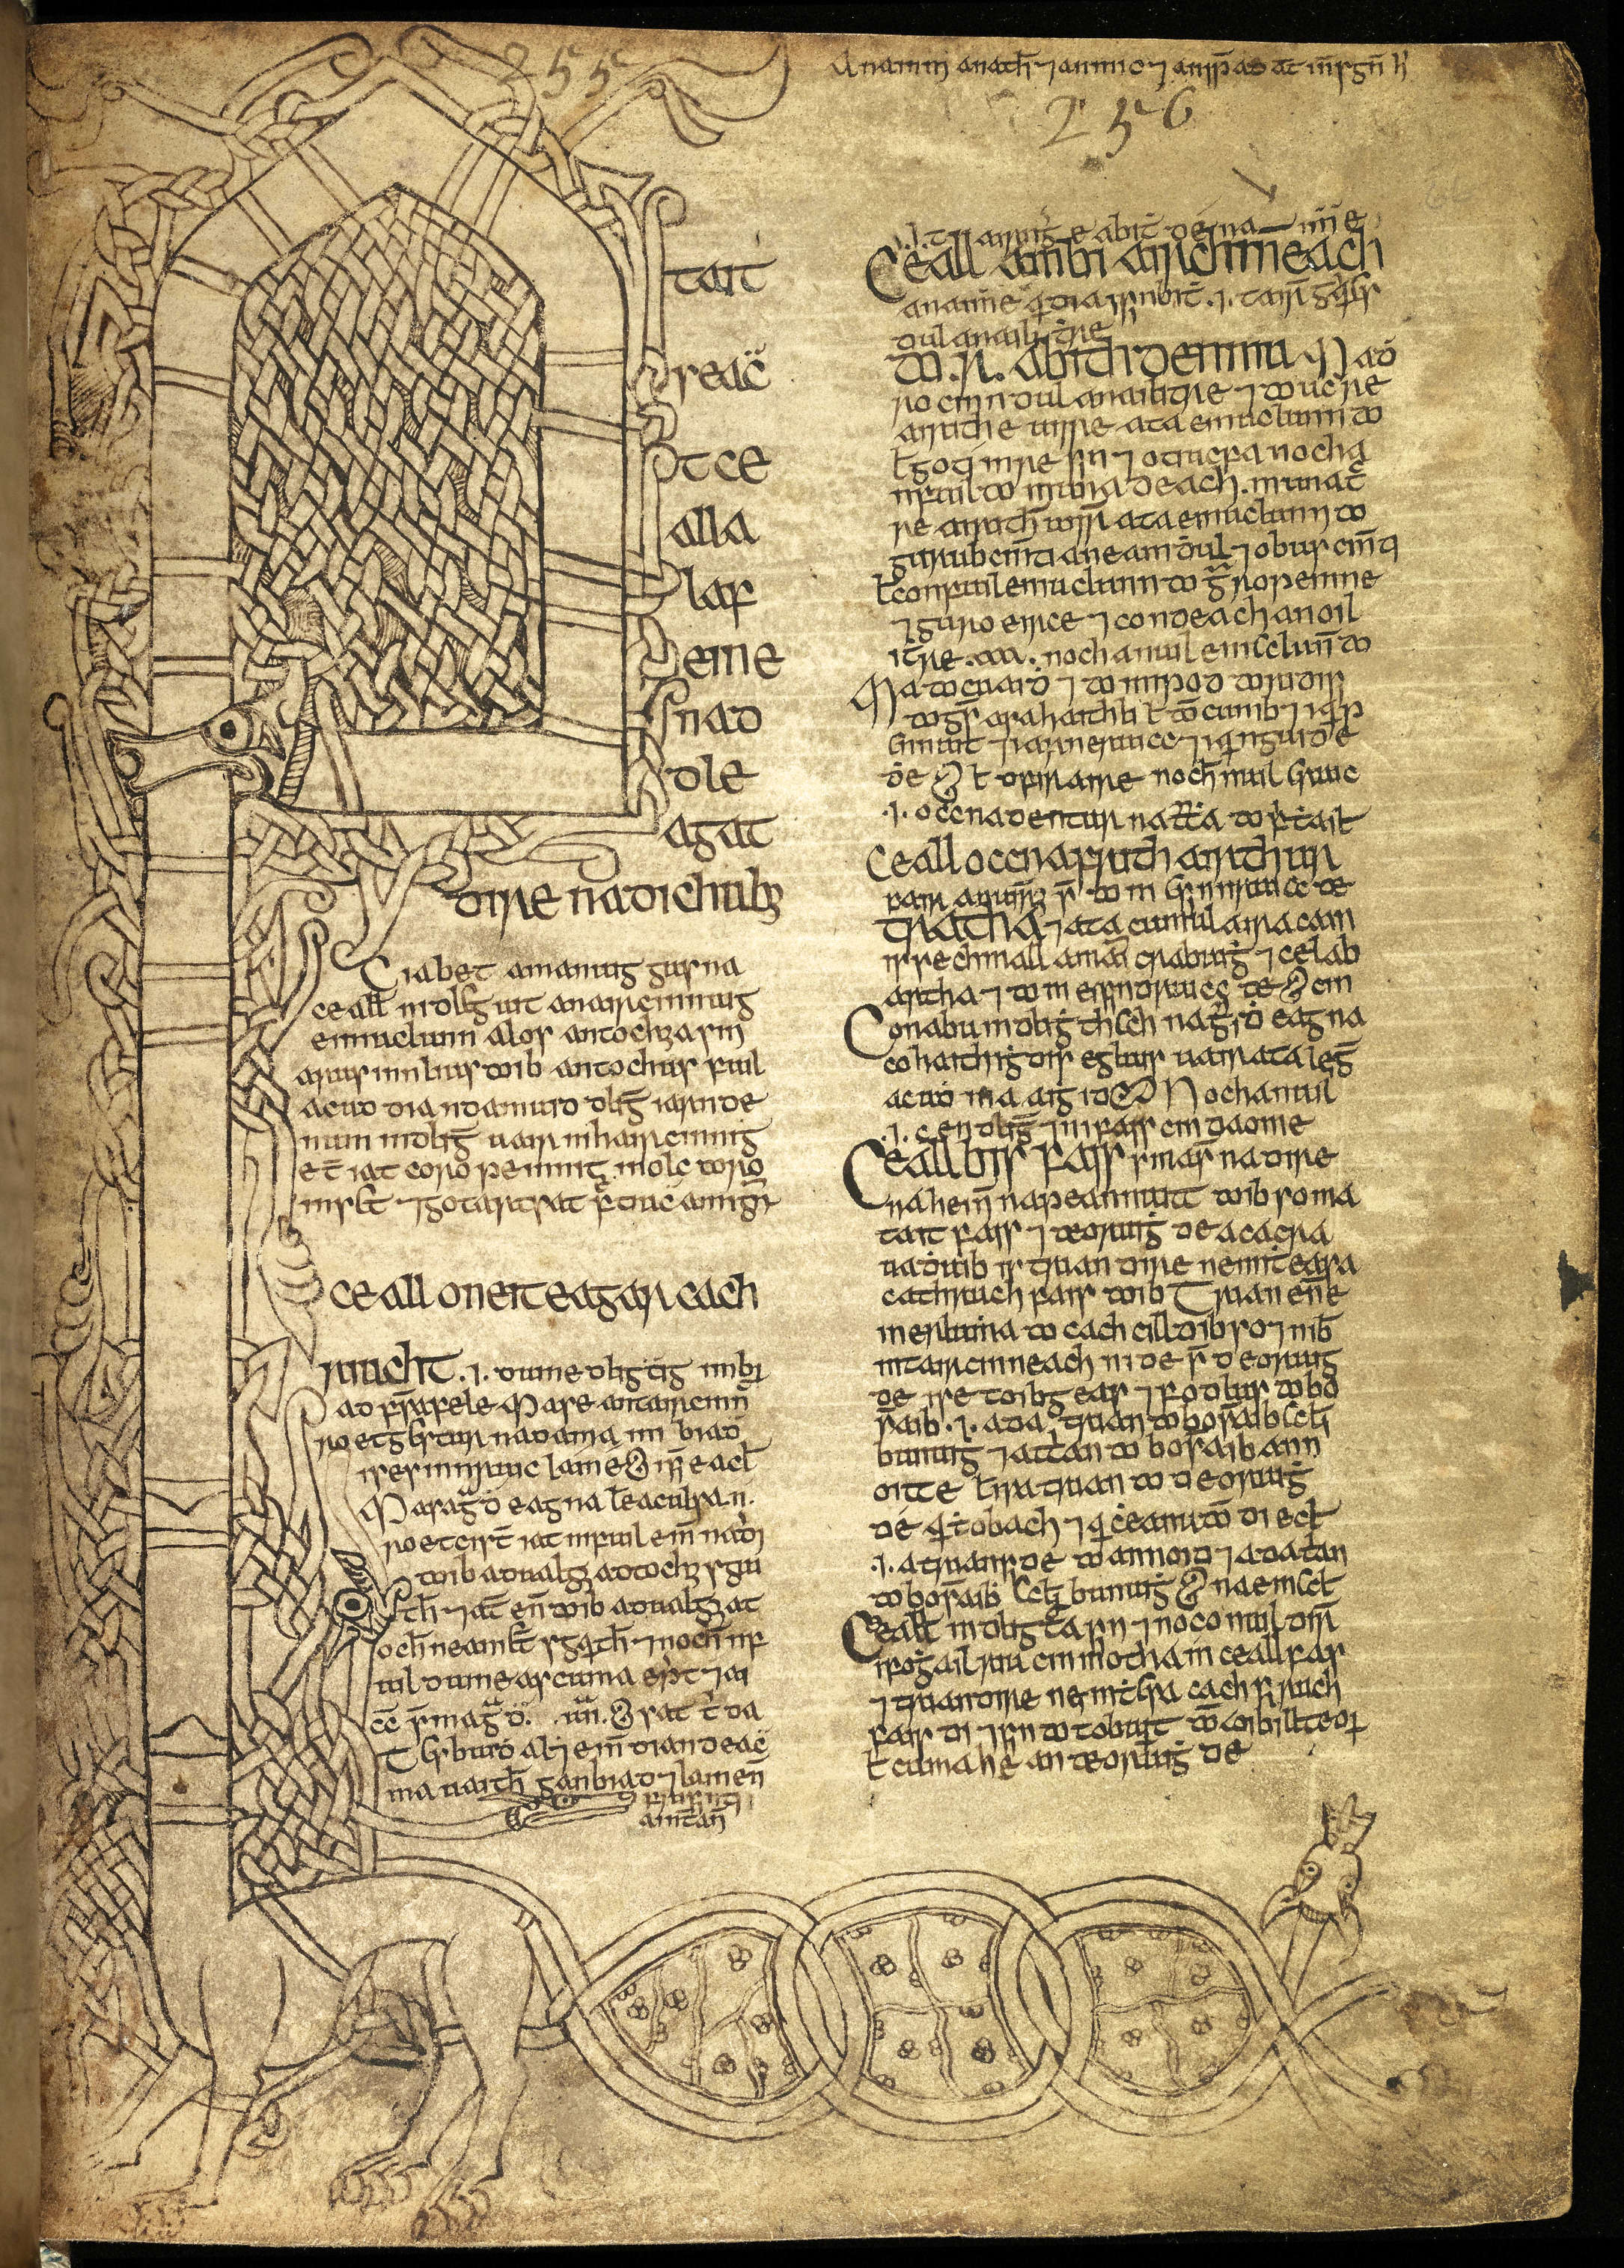 Illuminated page from the Seanchus Mór